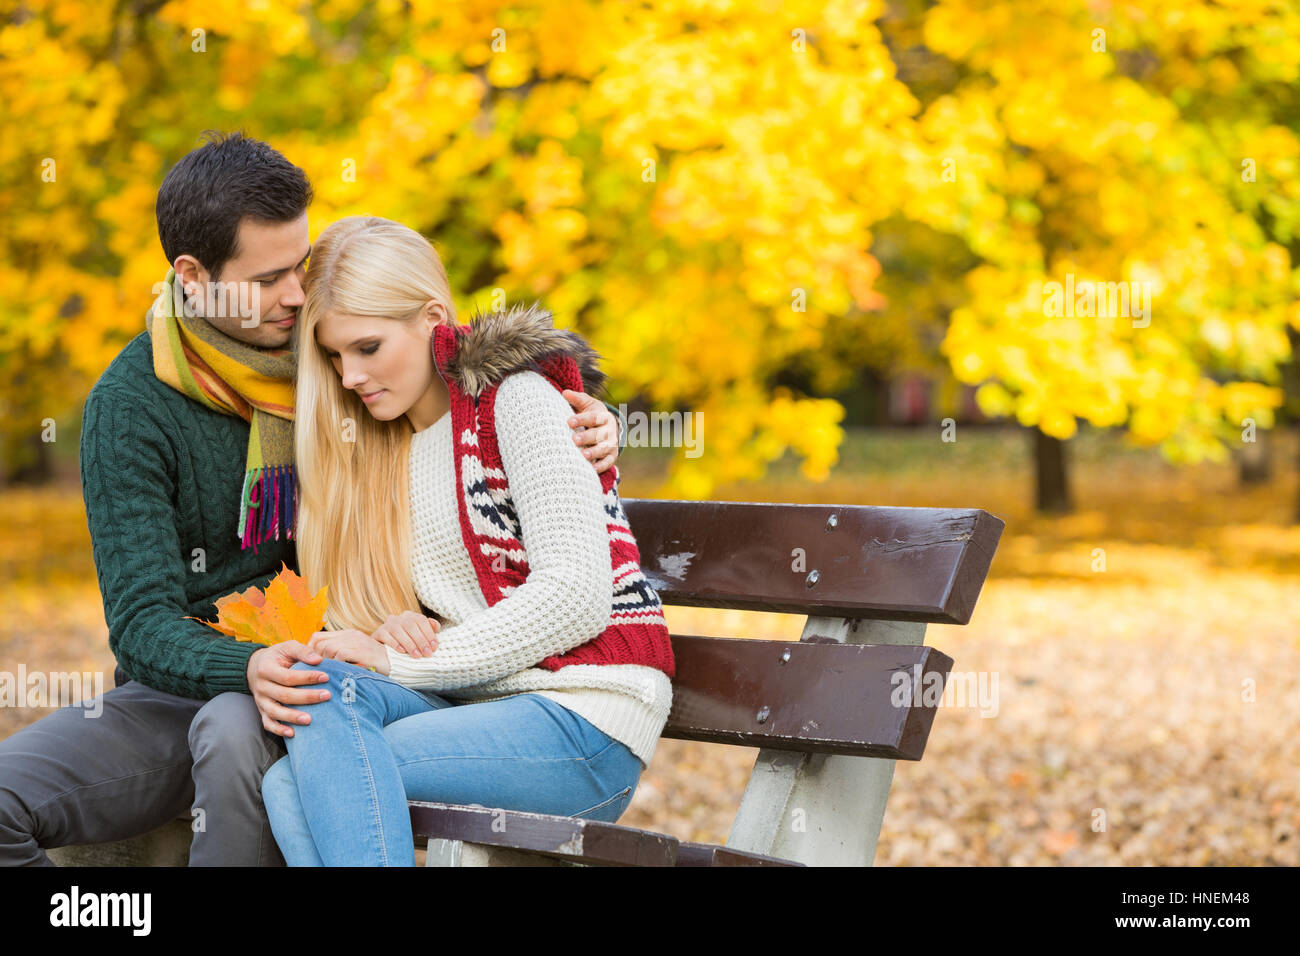 Loving young man hugging shy woman on park bench during autumn Stock Photo